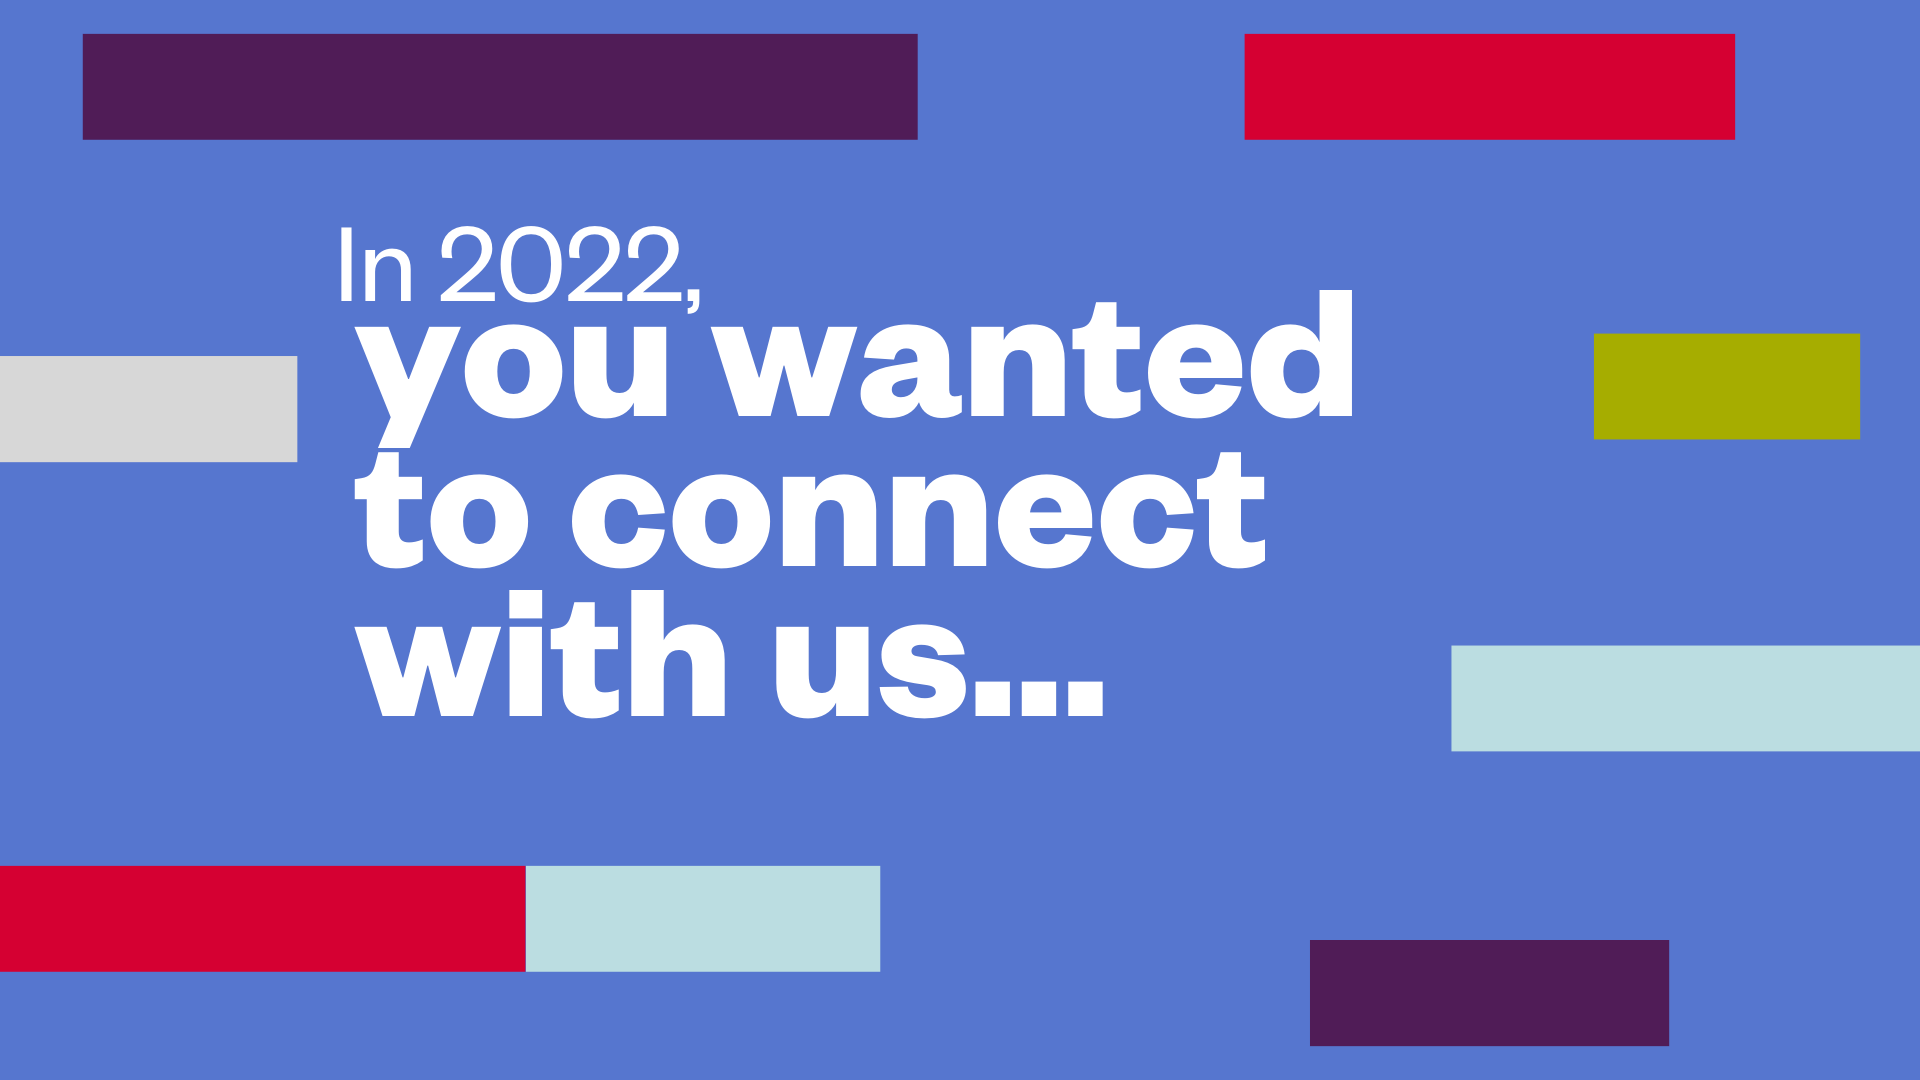 Blue blackground with text that reads, "In 2022, you wanted to connect with us"